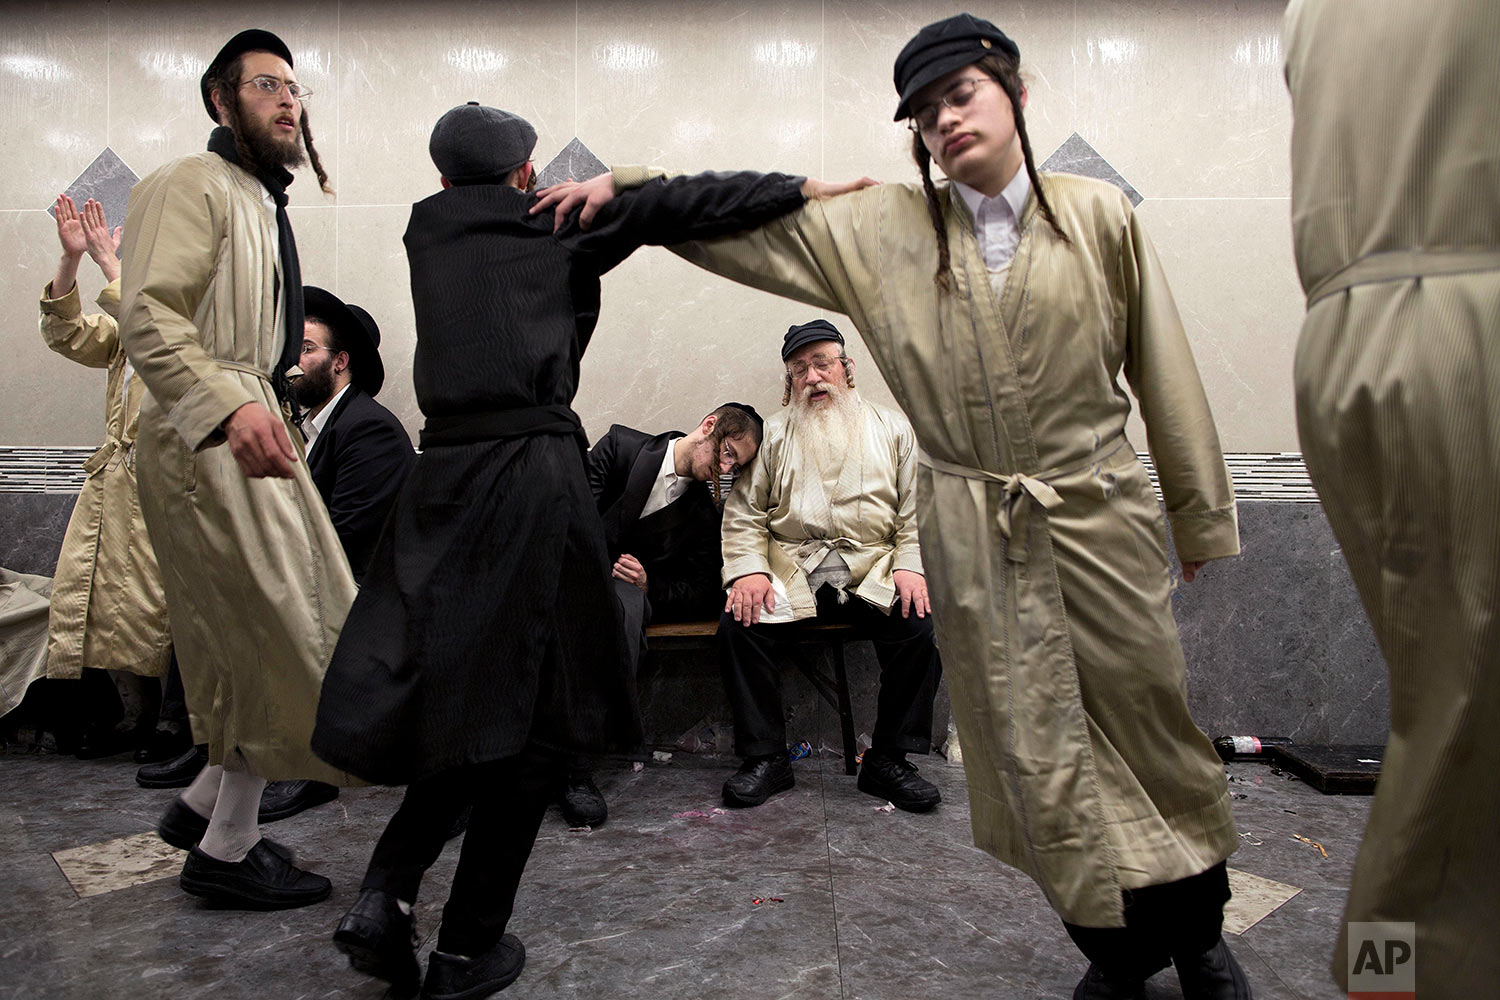  Intoxicated ultra-Orthodox Jewish men celebrate the holiday of Purim in the Mea Shearim neighborhood of Jerusalem, Monday, March 13, 2017. Purim celebrates the Jews' salvation from genocide in ancient Persia, as recounted in the Scroll of Esther. (AP Photo/Oded Balilty) 